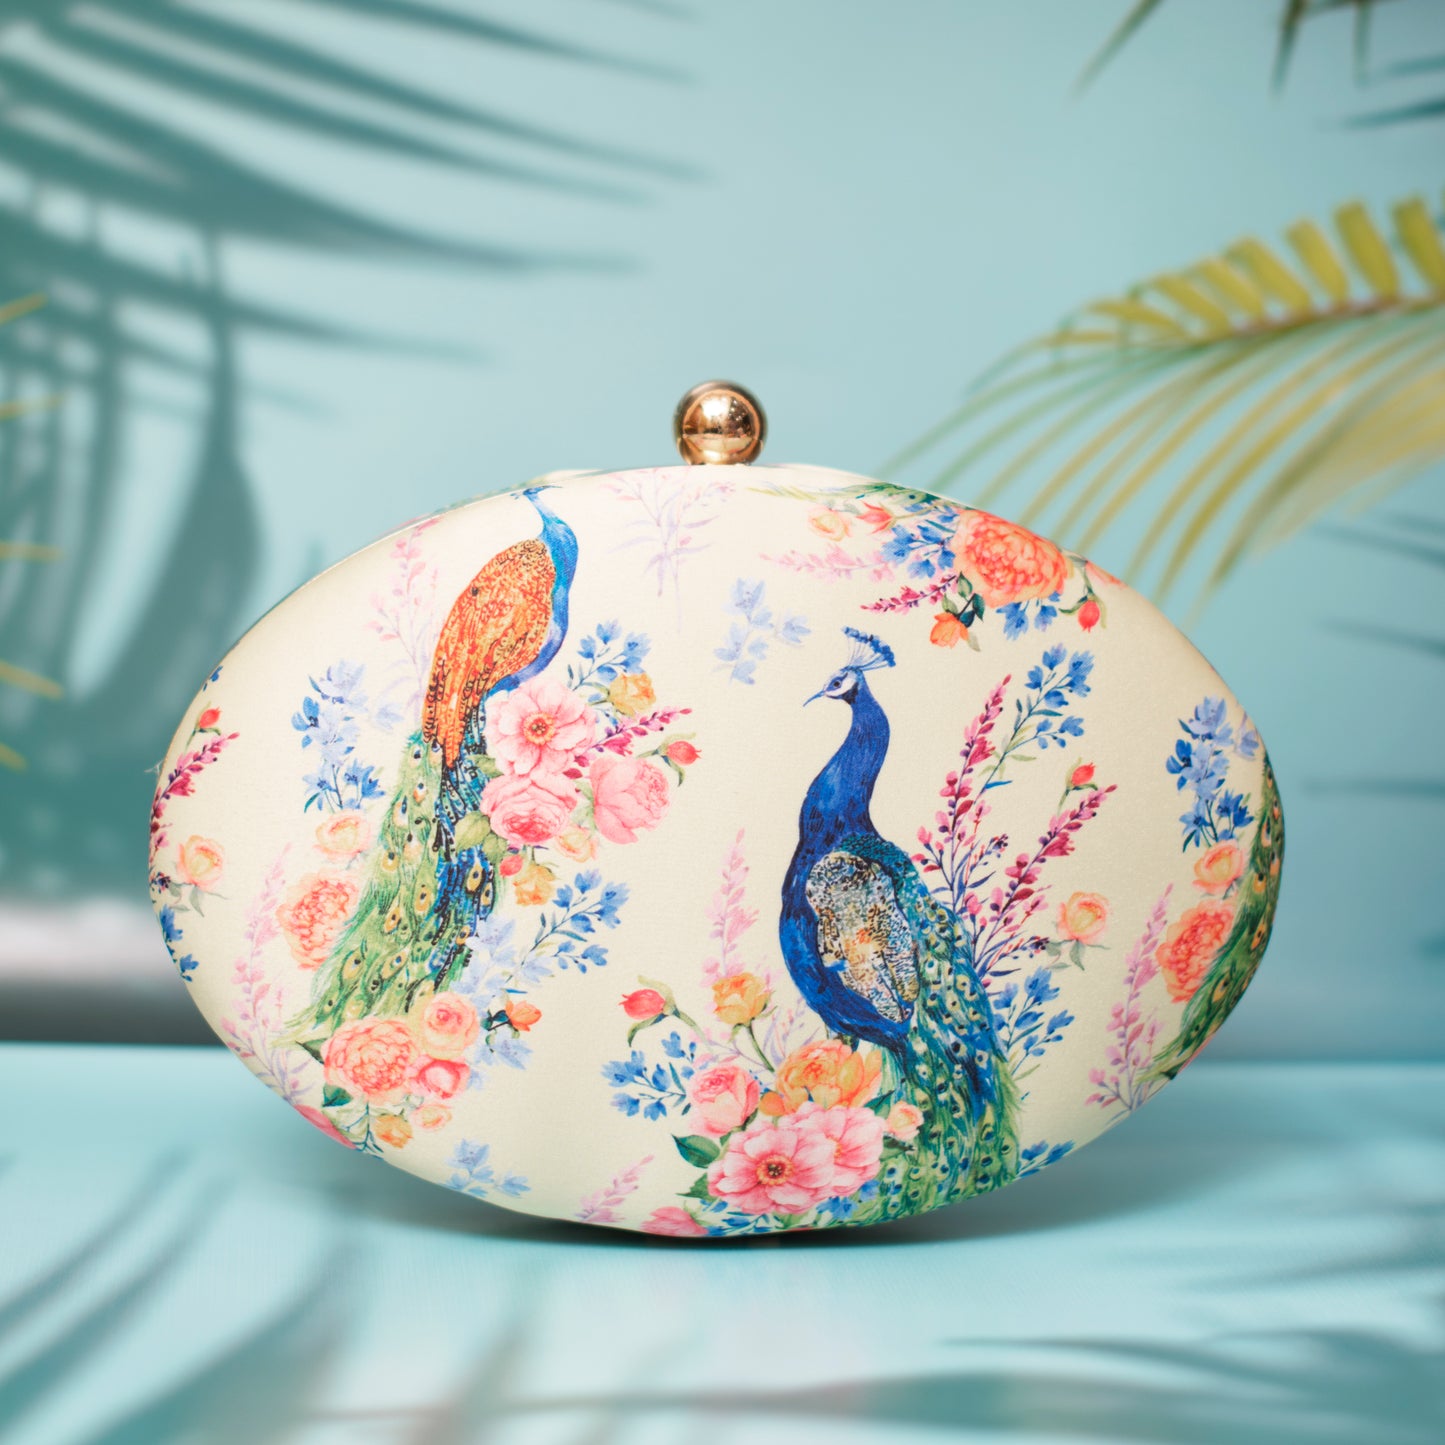 Peacock And Floral Printed Clutch